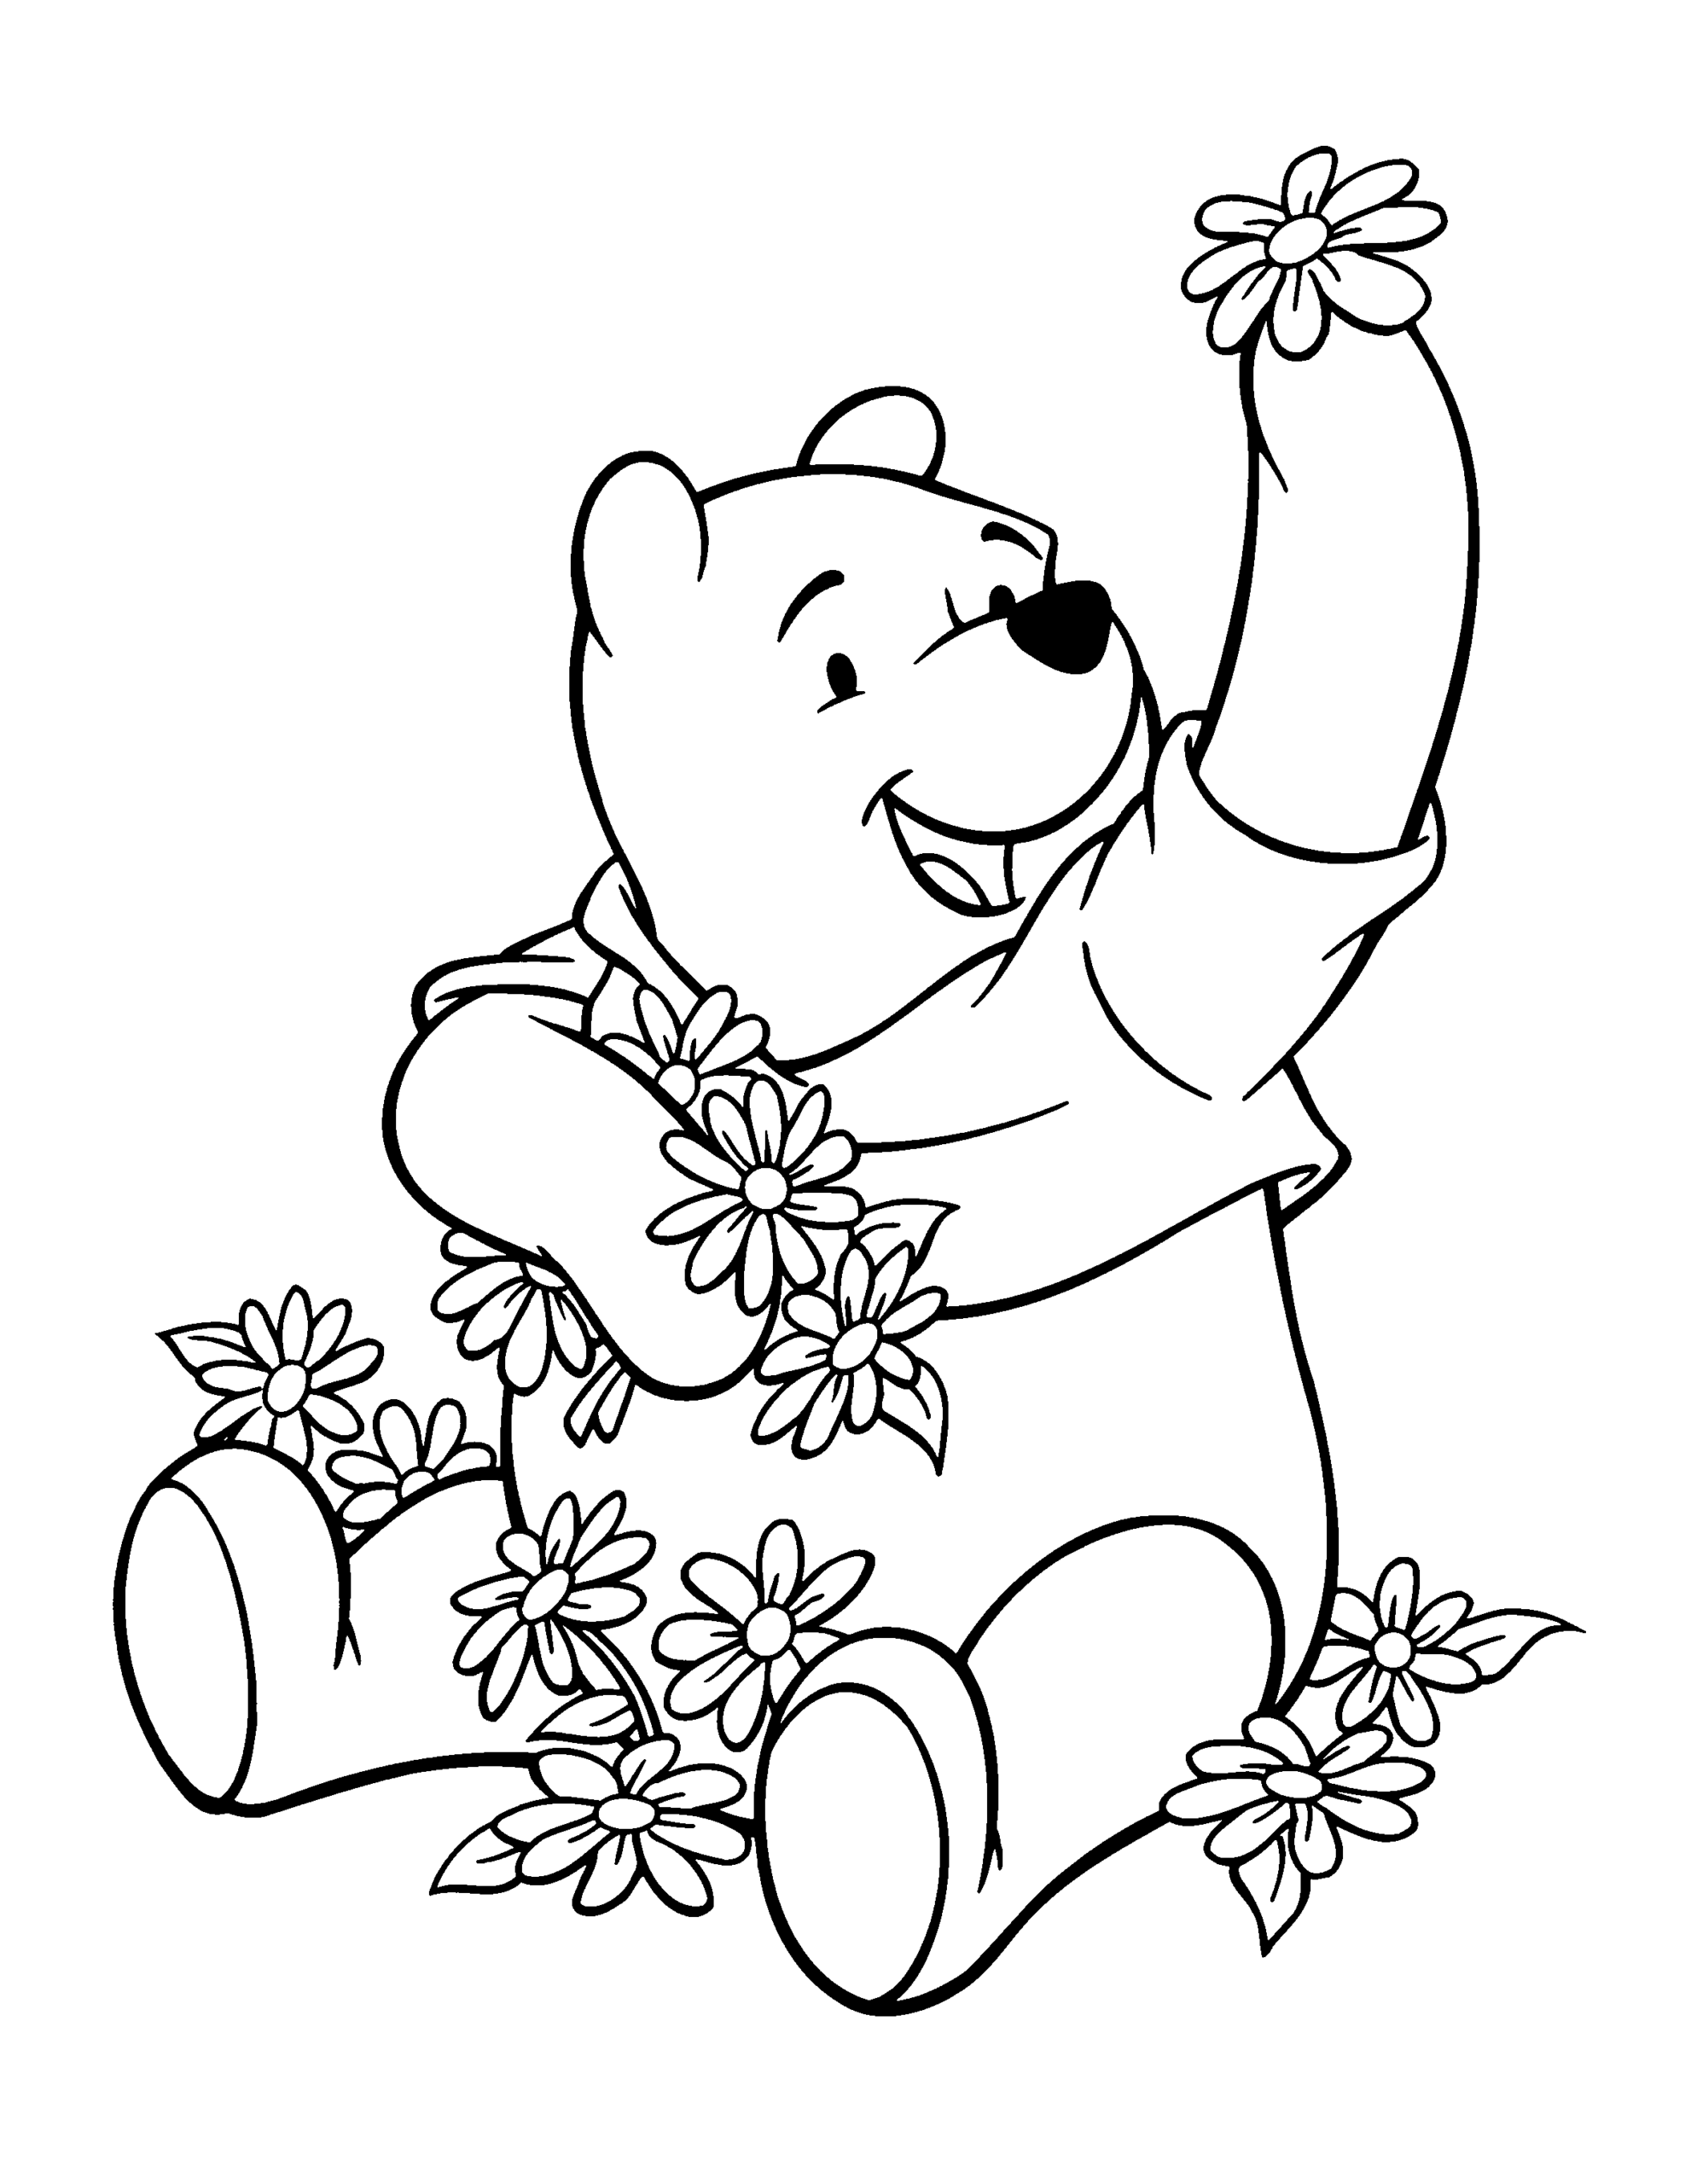 Winnie the Pooh Coloring Pages Cartoons Baby Winnie The Pooh and Friends Printable 2020 6935 Coloring4free